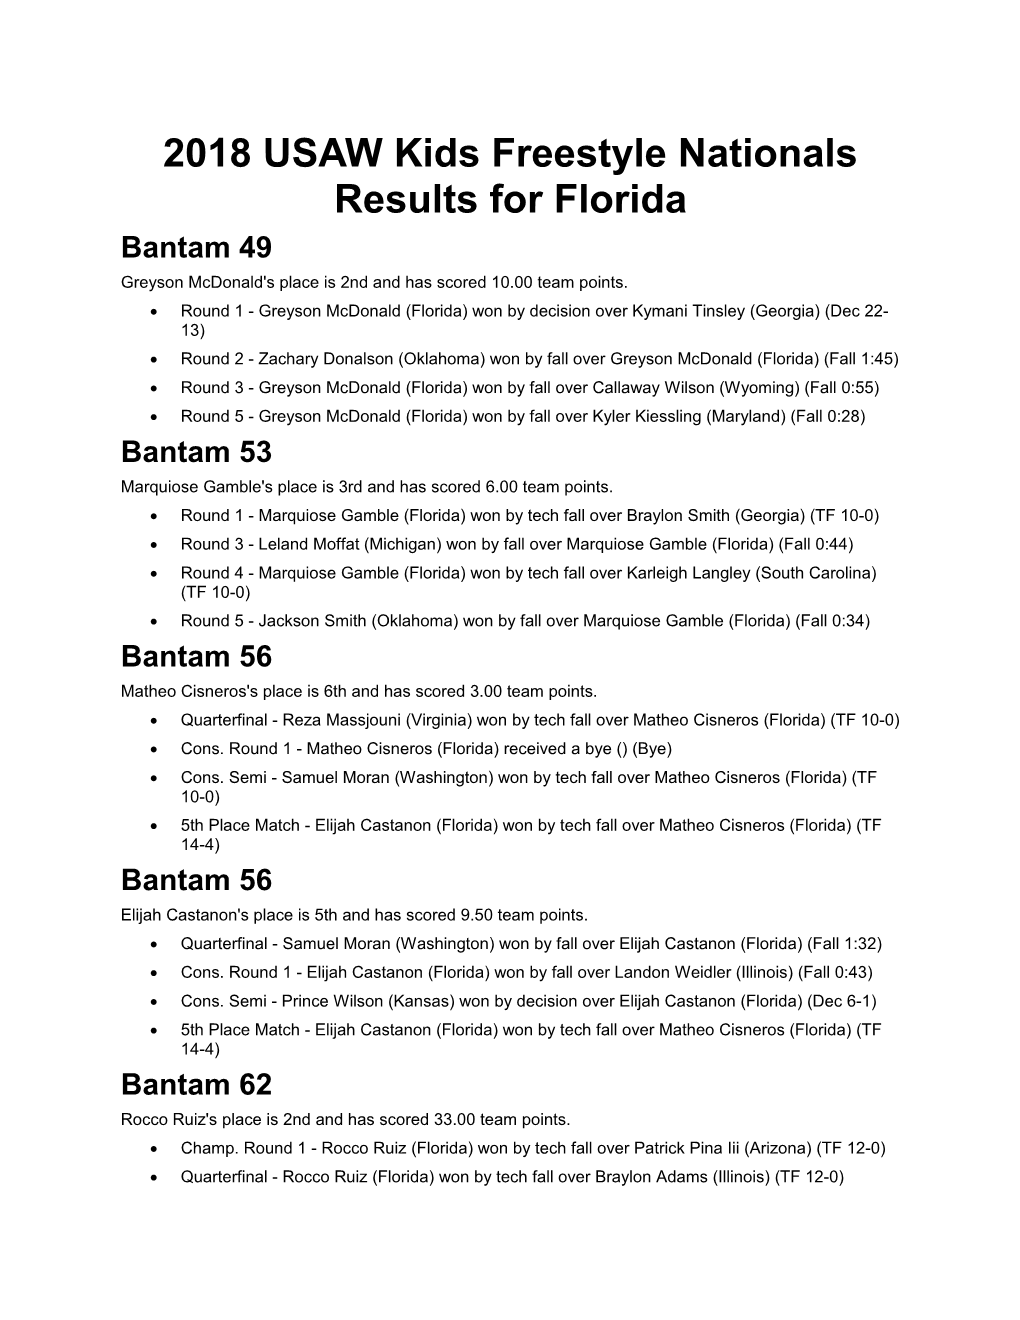 2018 USAW Kids Freestyle Nationals Results for Florida